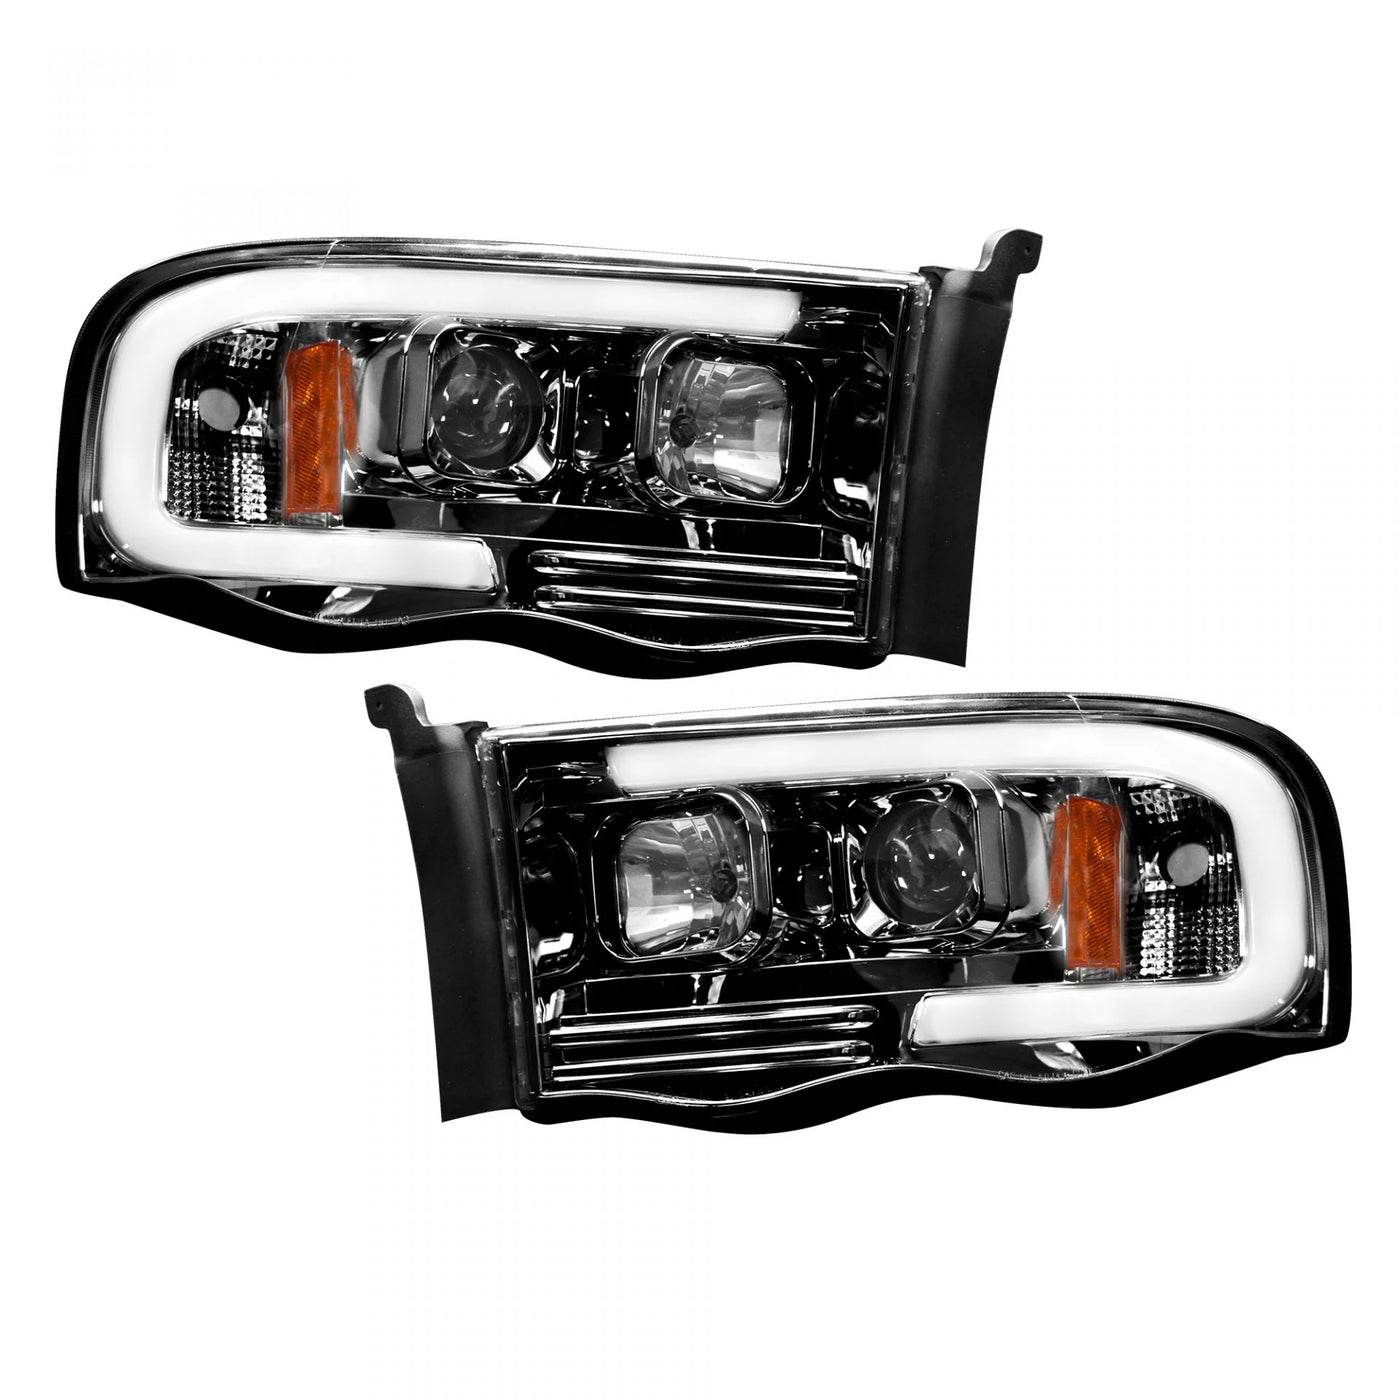 10 Tips for Choosing the Right LED Lights for Your Truck